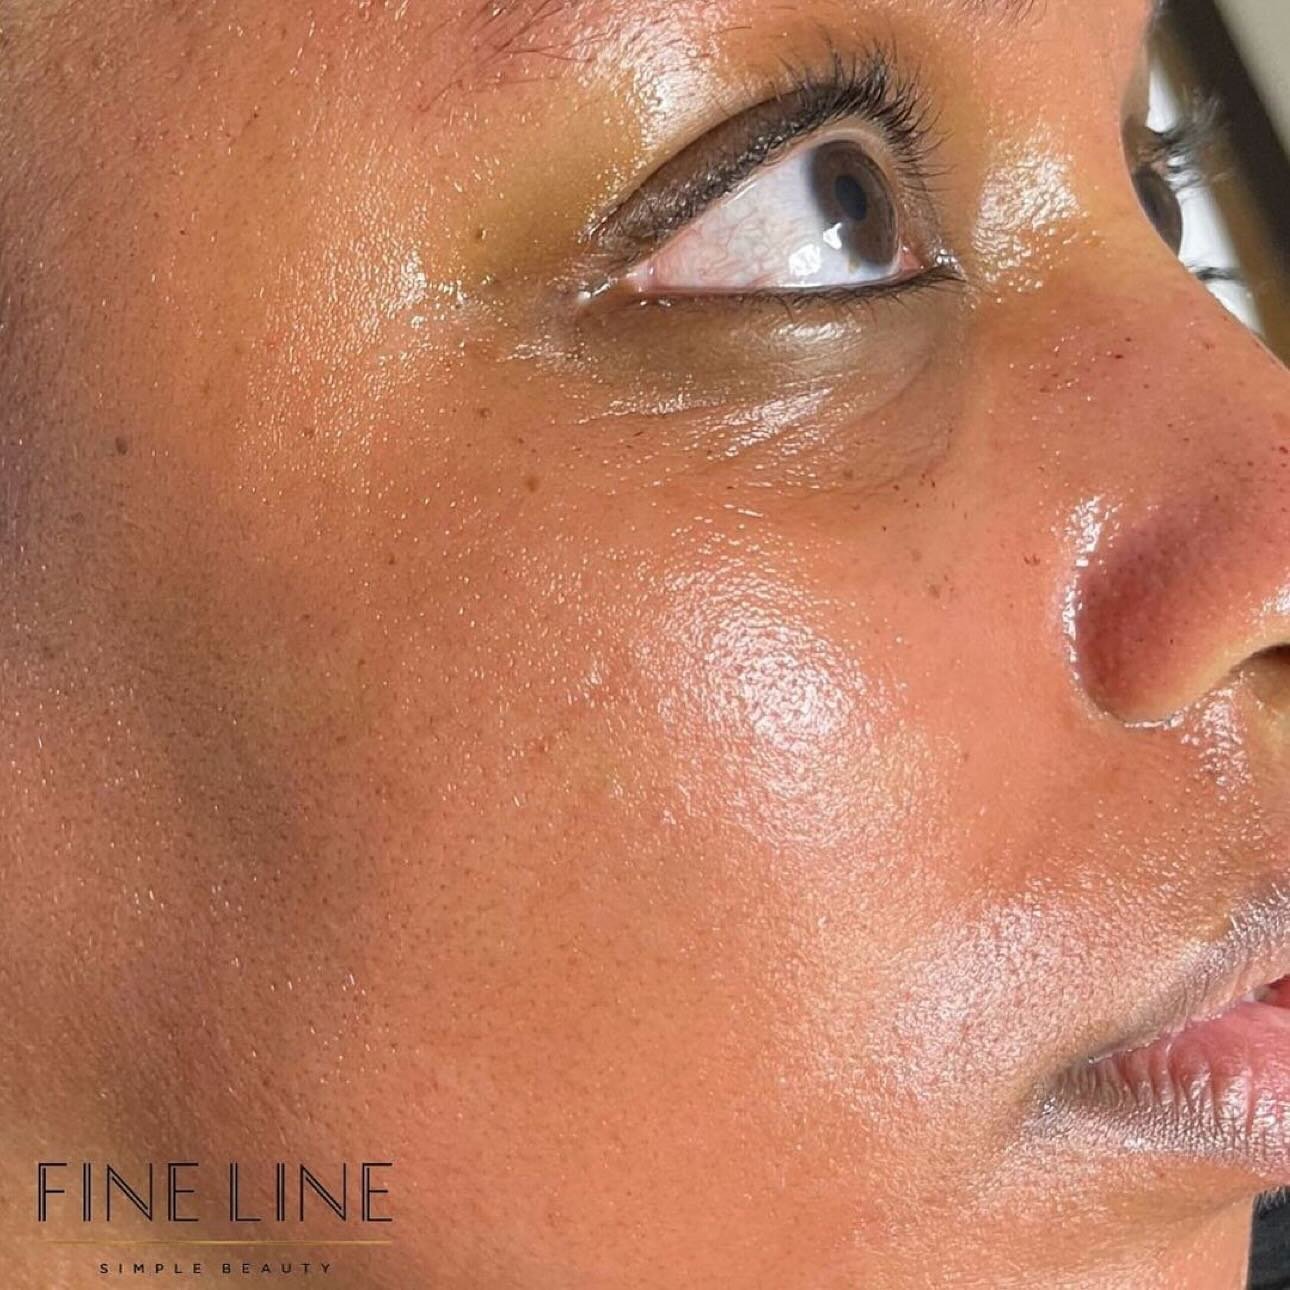 ❓When it comes to microneedling, do you ever wonder &ldquo;𝐖𝐡𝐚𝐭 𝐧𝐞𝐞𝐝𝐥𝐞 𝐝𝐞𝐩𝐭𝐡 𝐬𝐡𝐨𝐮𝐥𝐝 𝐈 𝐮𝐬𝐞?&rdquo;&hellip;..
💡We need to discuss clinical endpoints. Clinical endpoints are immediate or early tissue reactions that occur during